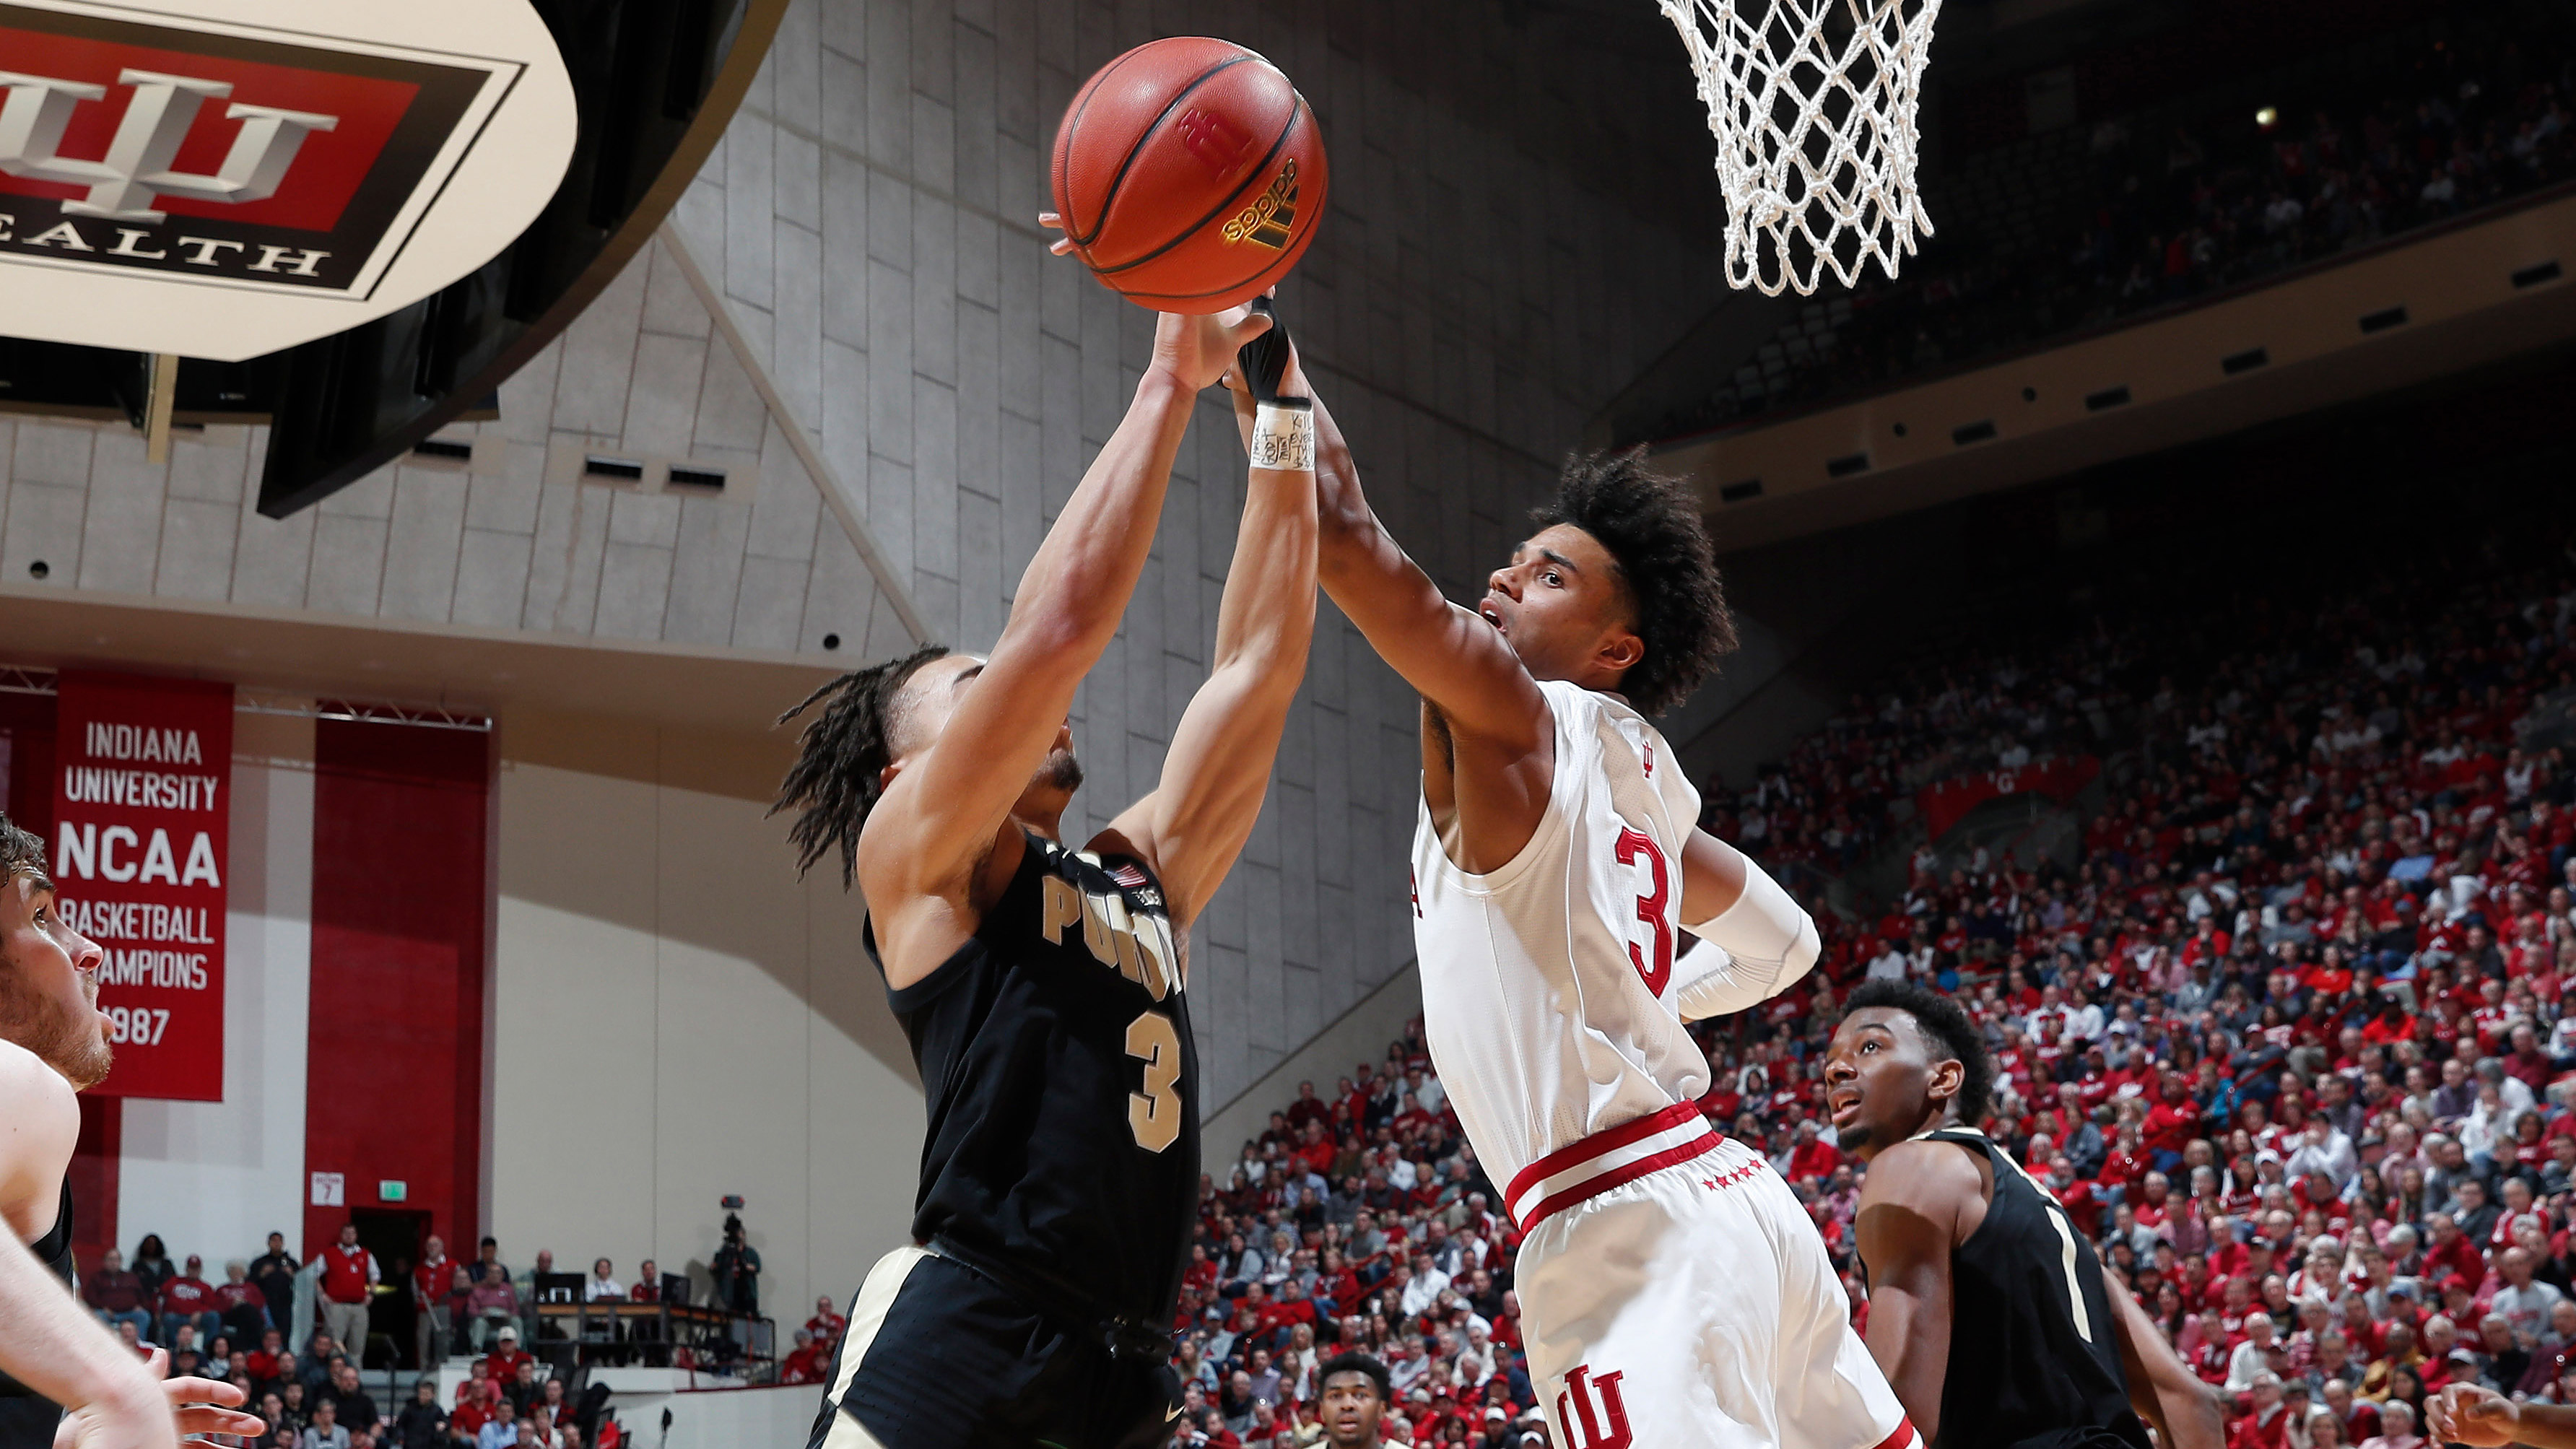 Haarms' late tip-in sneaks No. 15 Purdue past Indiana 48-46